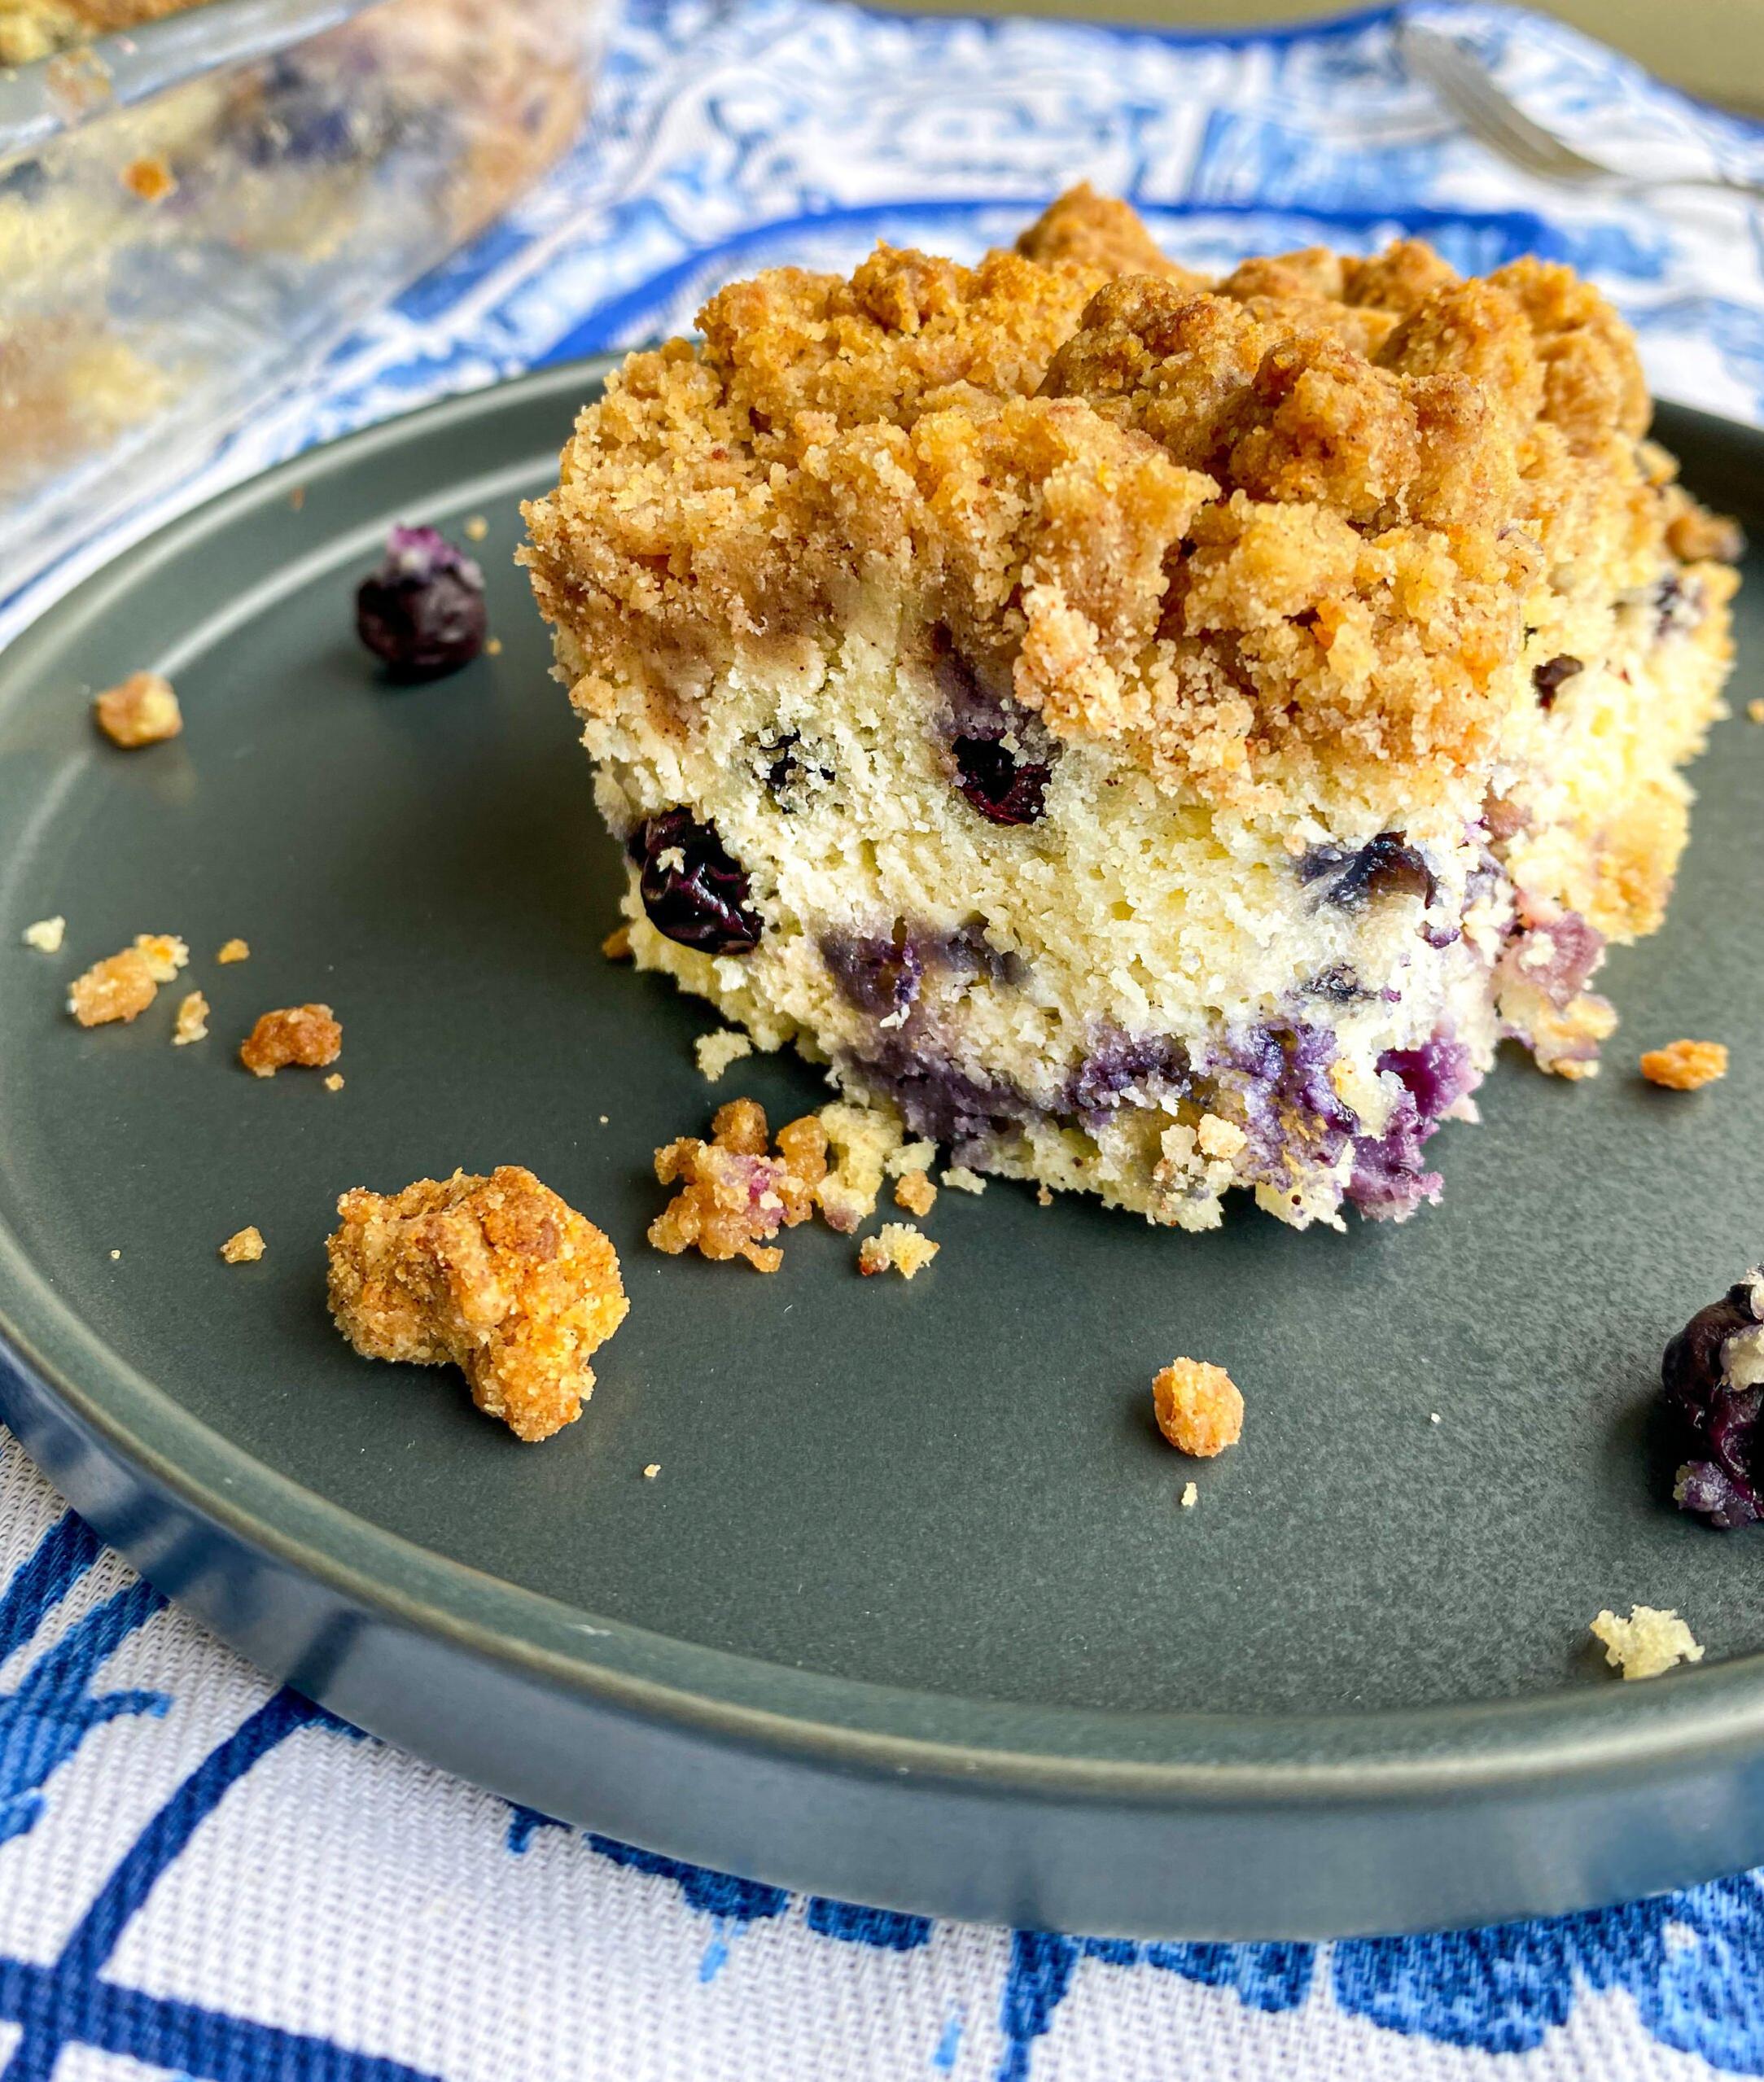  Can't decide between coffee and dessert? Have both with this blueberry coffee cake. 👌